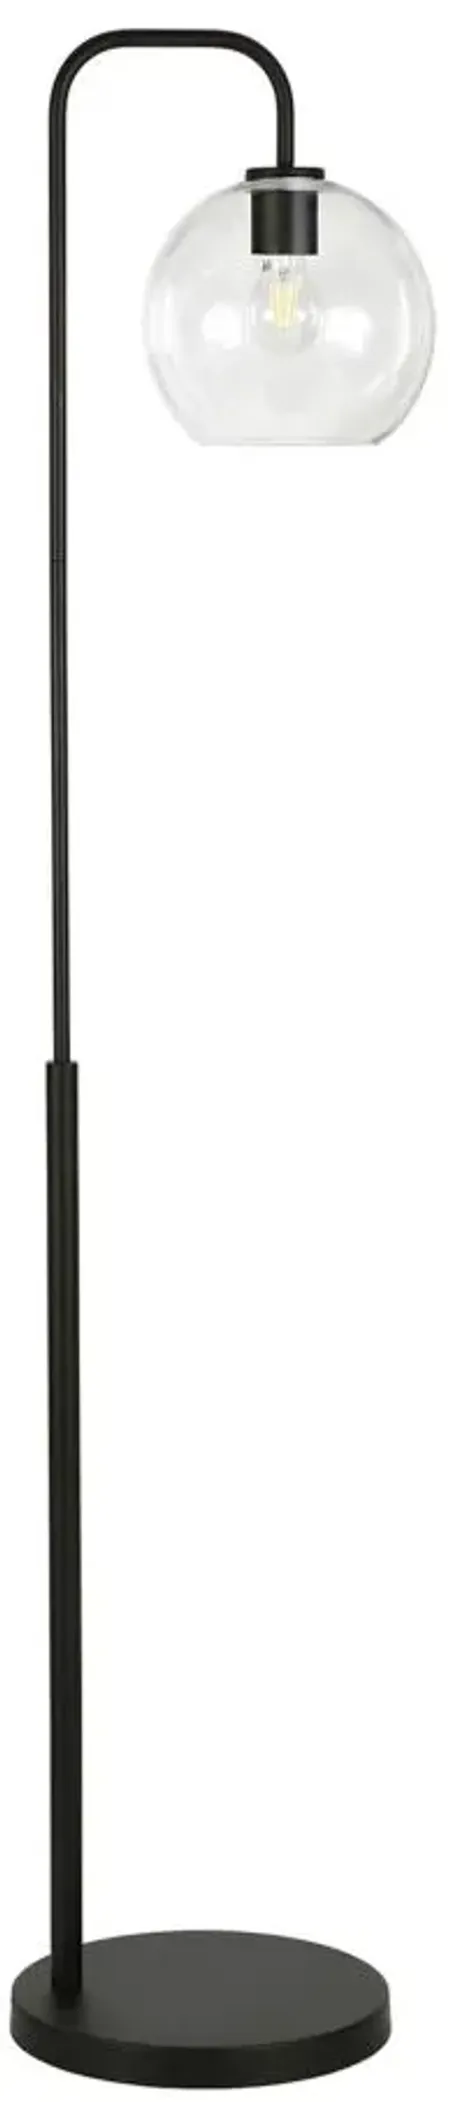 Hannes Arc Floor Lamp in Blackened Bronze by Hudson & Canal